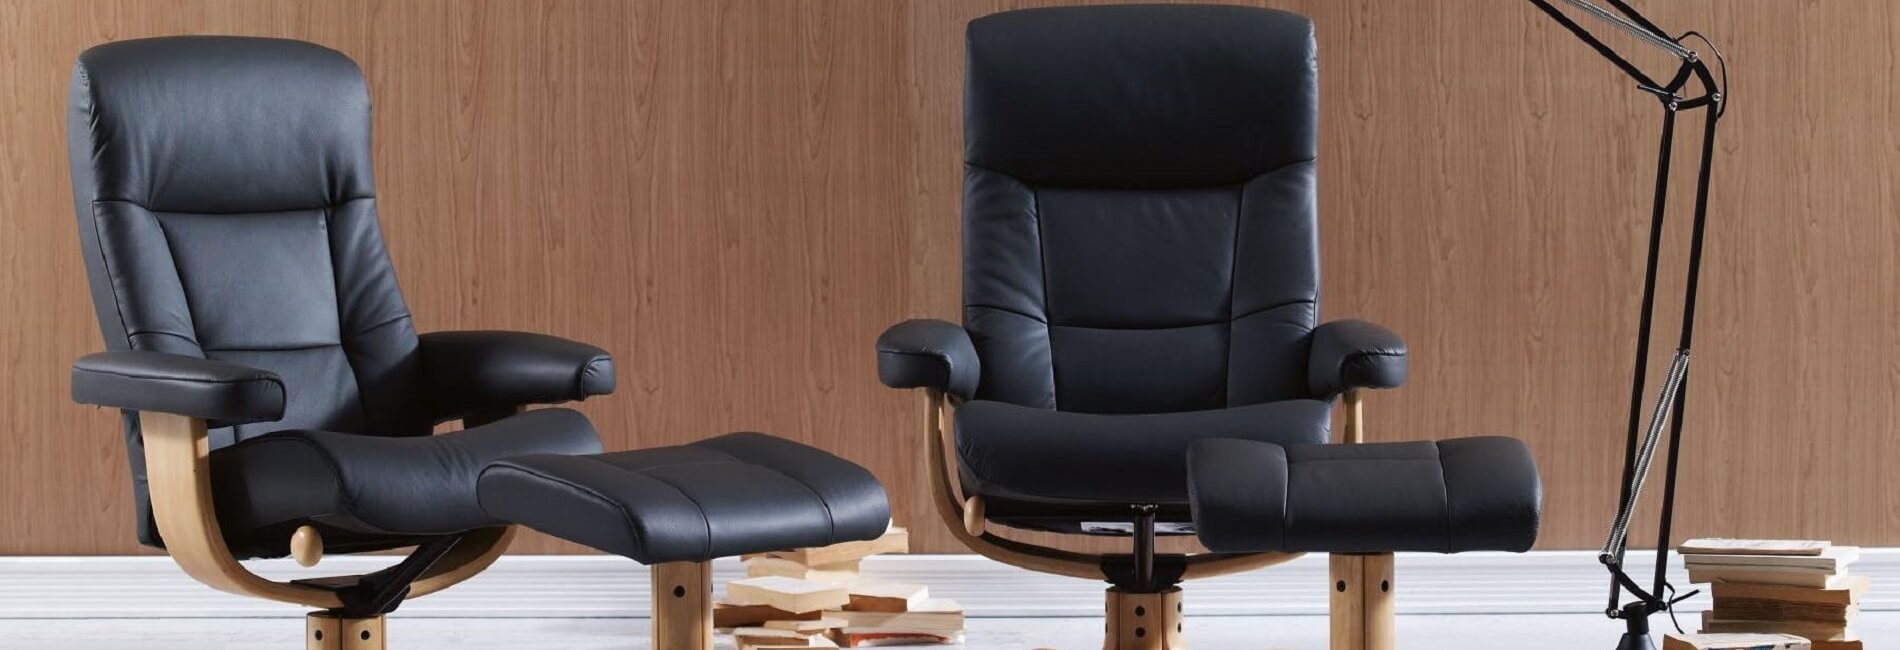 Modern Recliner Chair, Contemporary Leather Recliner Chair